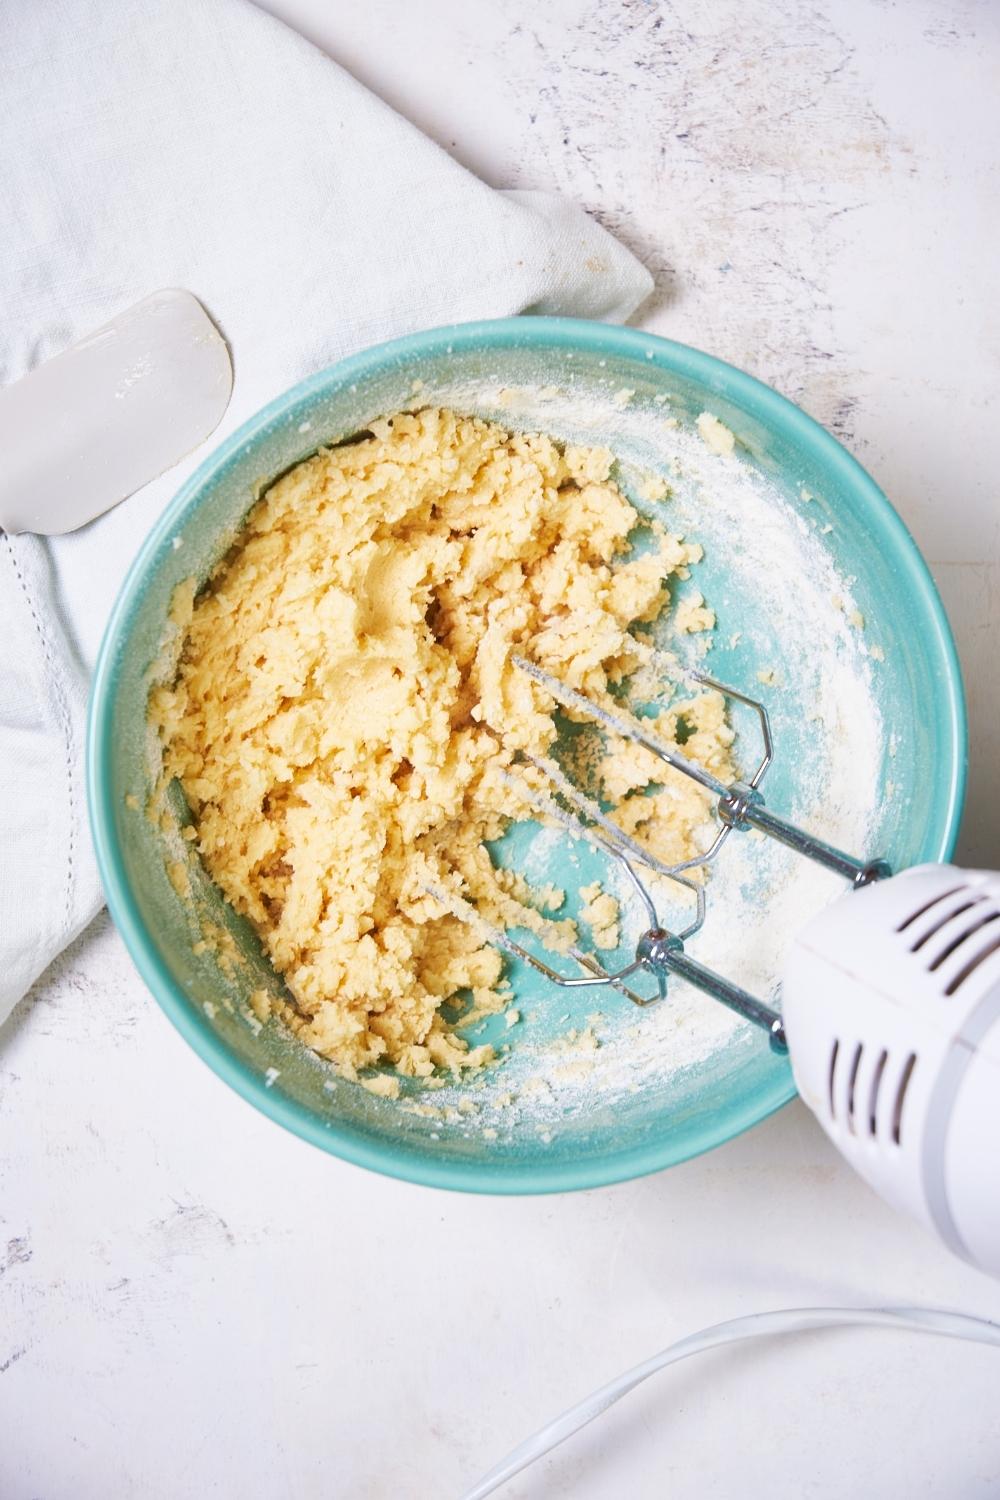 sugar cookie dough in a teal bowl being mixed together with an electric mixer. a tea towel and a rubber spatula sit to the side